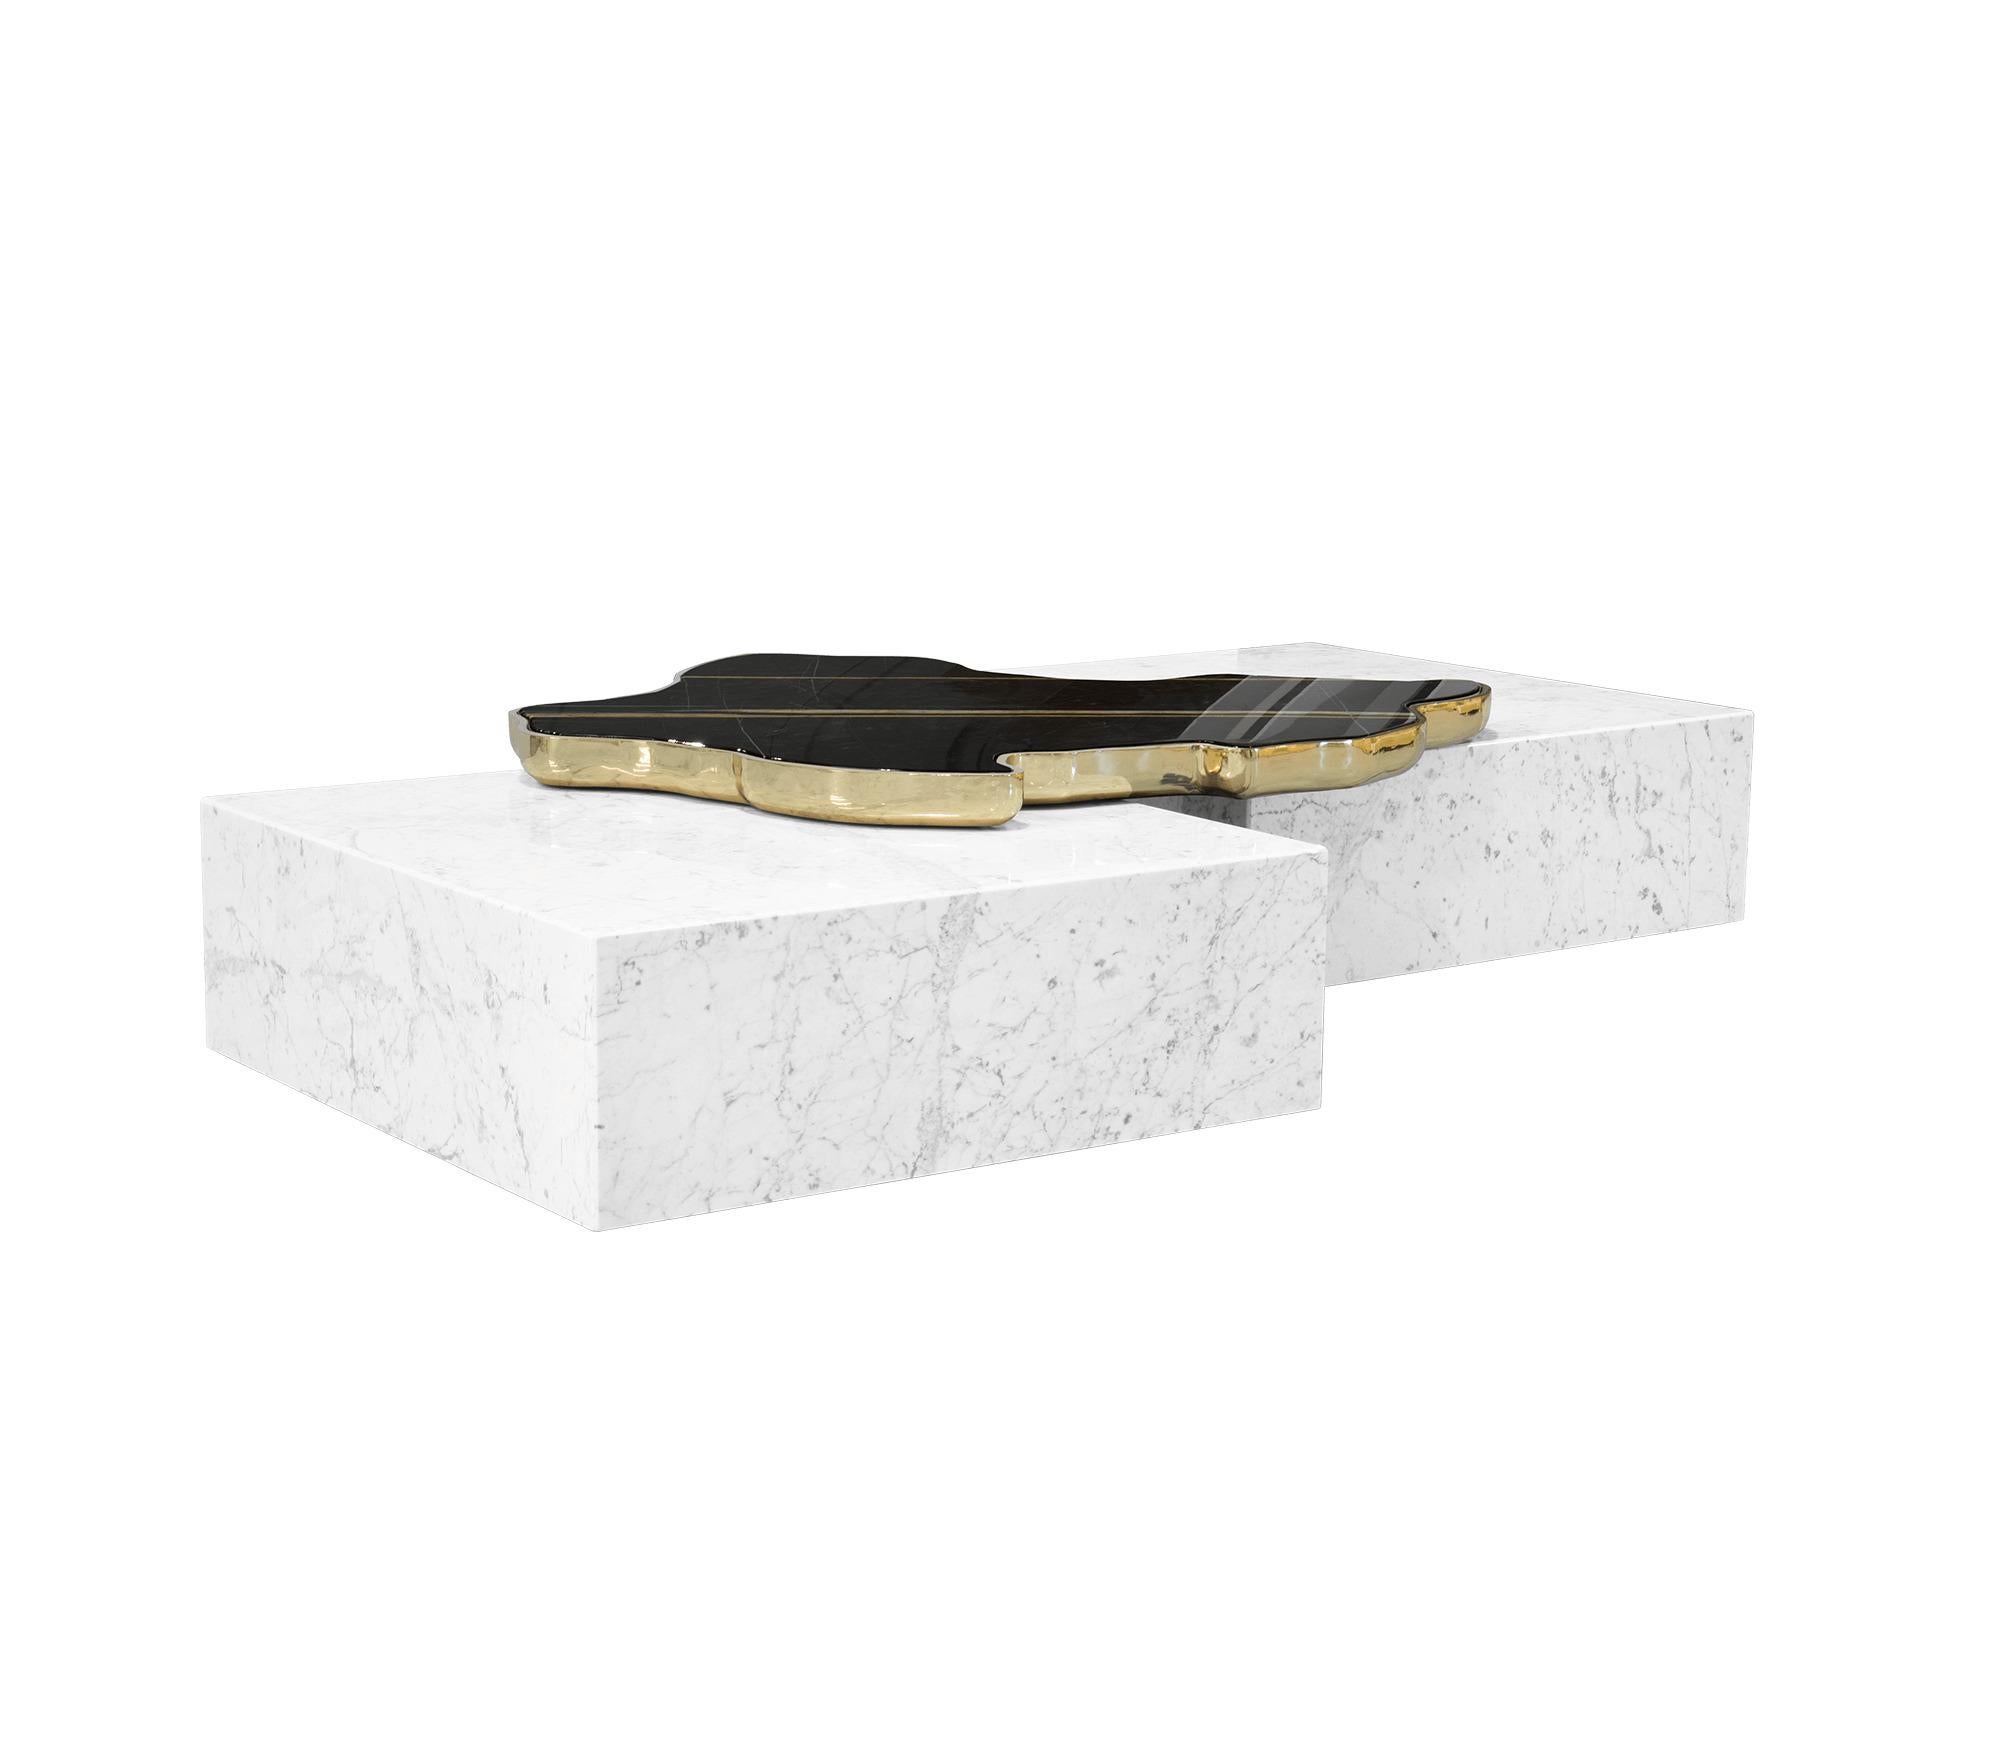 White marble center table.

Beautiful contemporary center table composed of two square marble modules, connected by an organic marble surface element on top wrapped in cast brass.

Dimensions: H: 35 cm, W: 206 cm, D: 136 cm

Production time 12